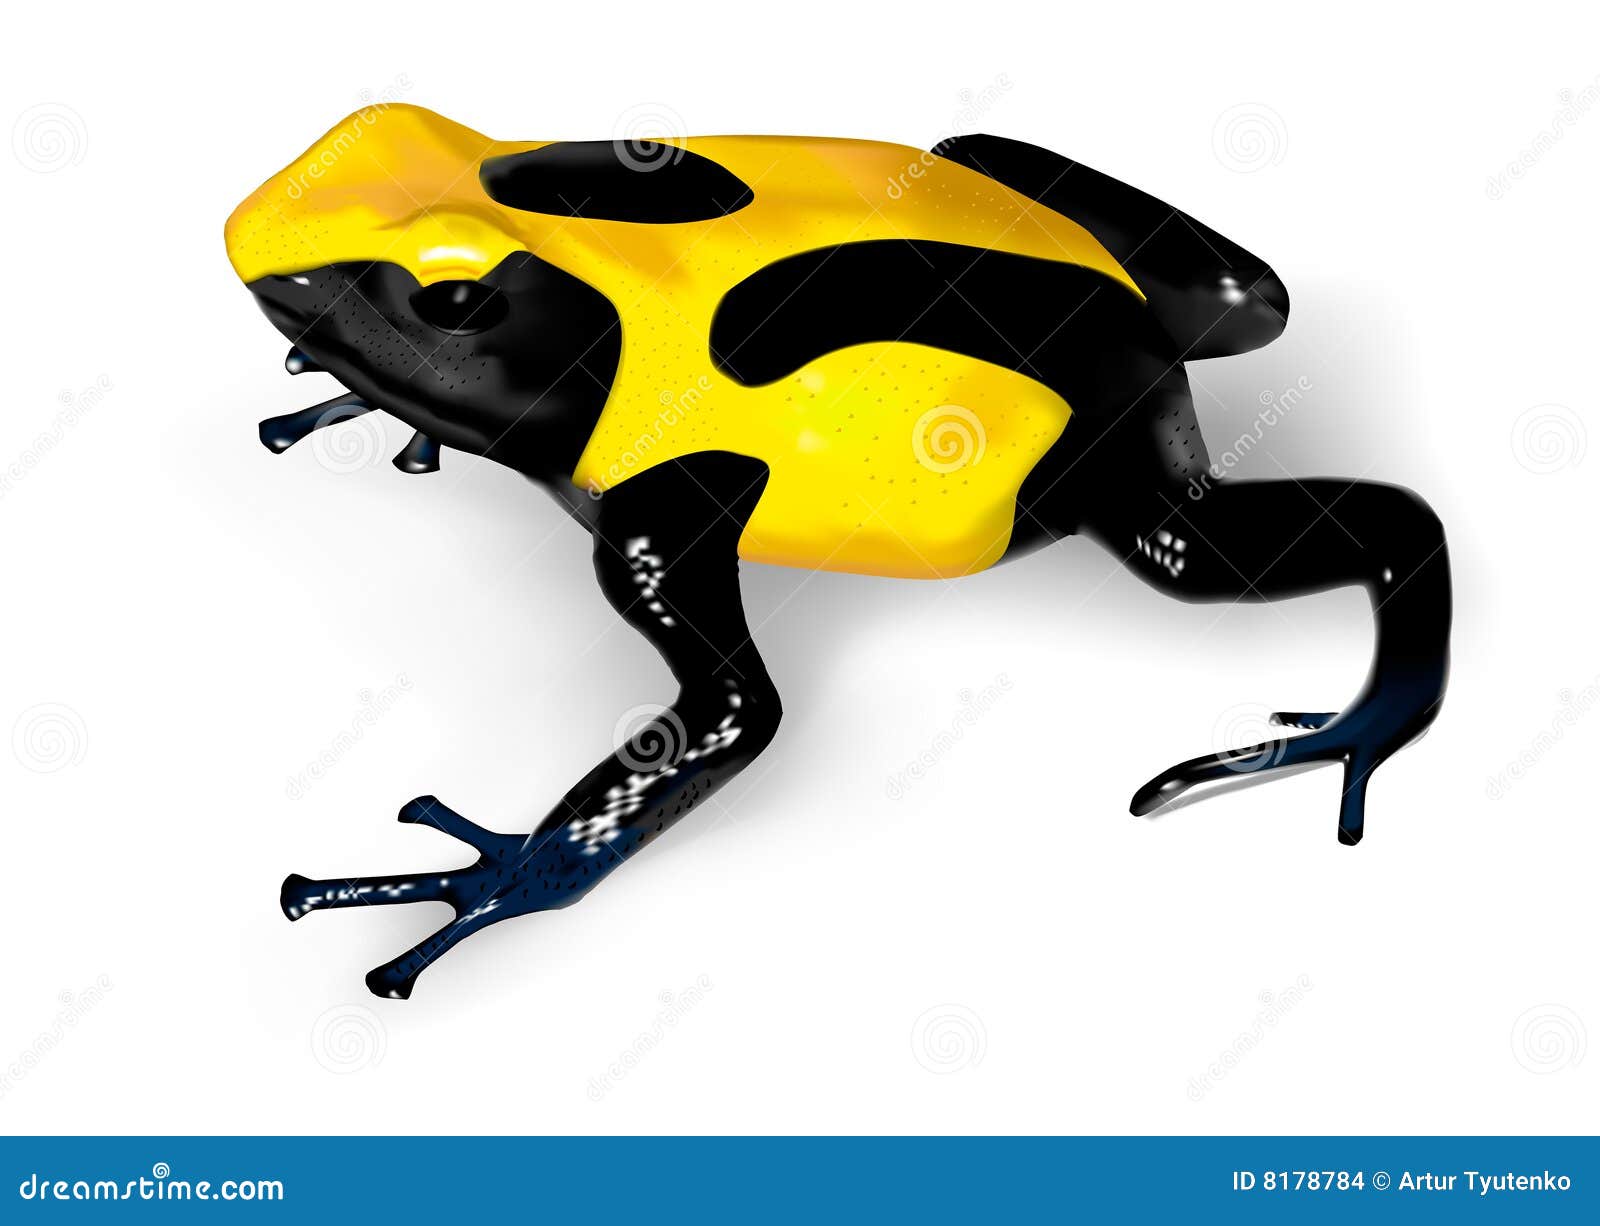 dyeing poison-dart frog